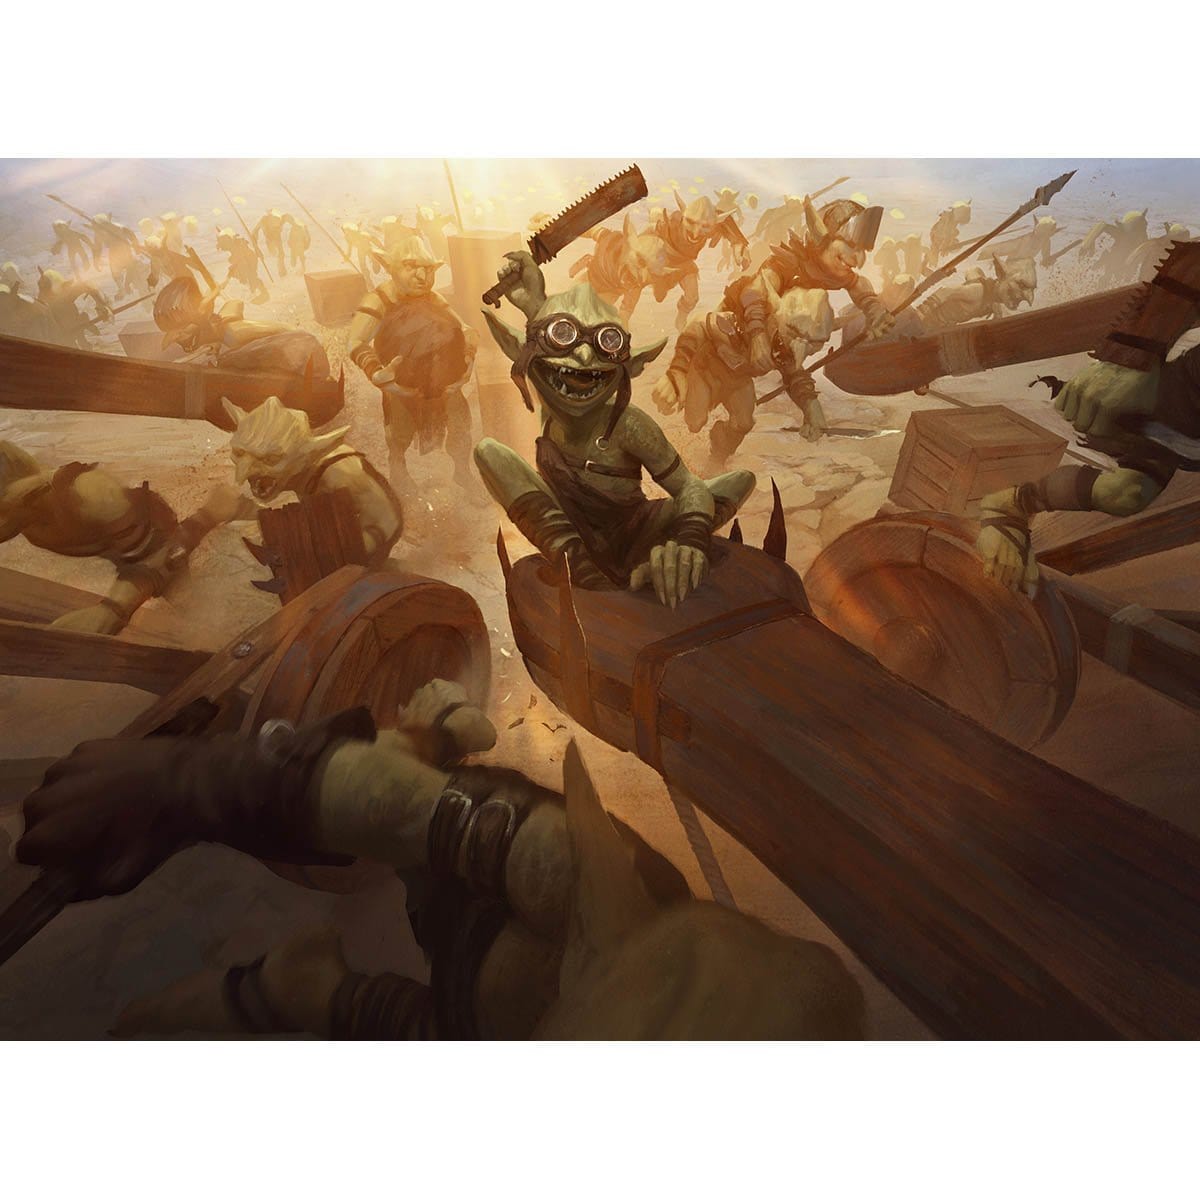 Goblin Barrage Print - Print - Original Magic Art - Accessories for Magic the Gathering and other card games